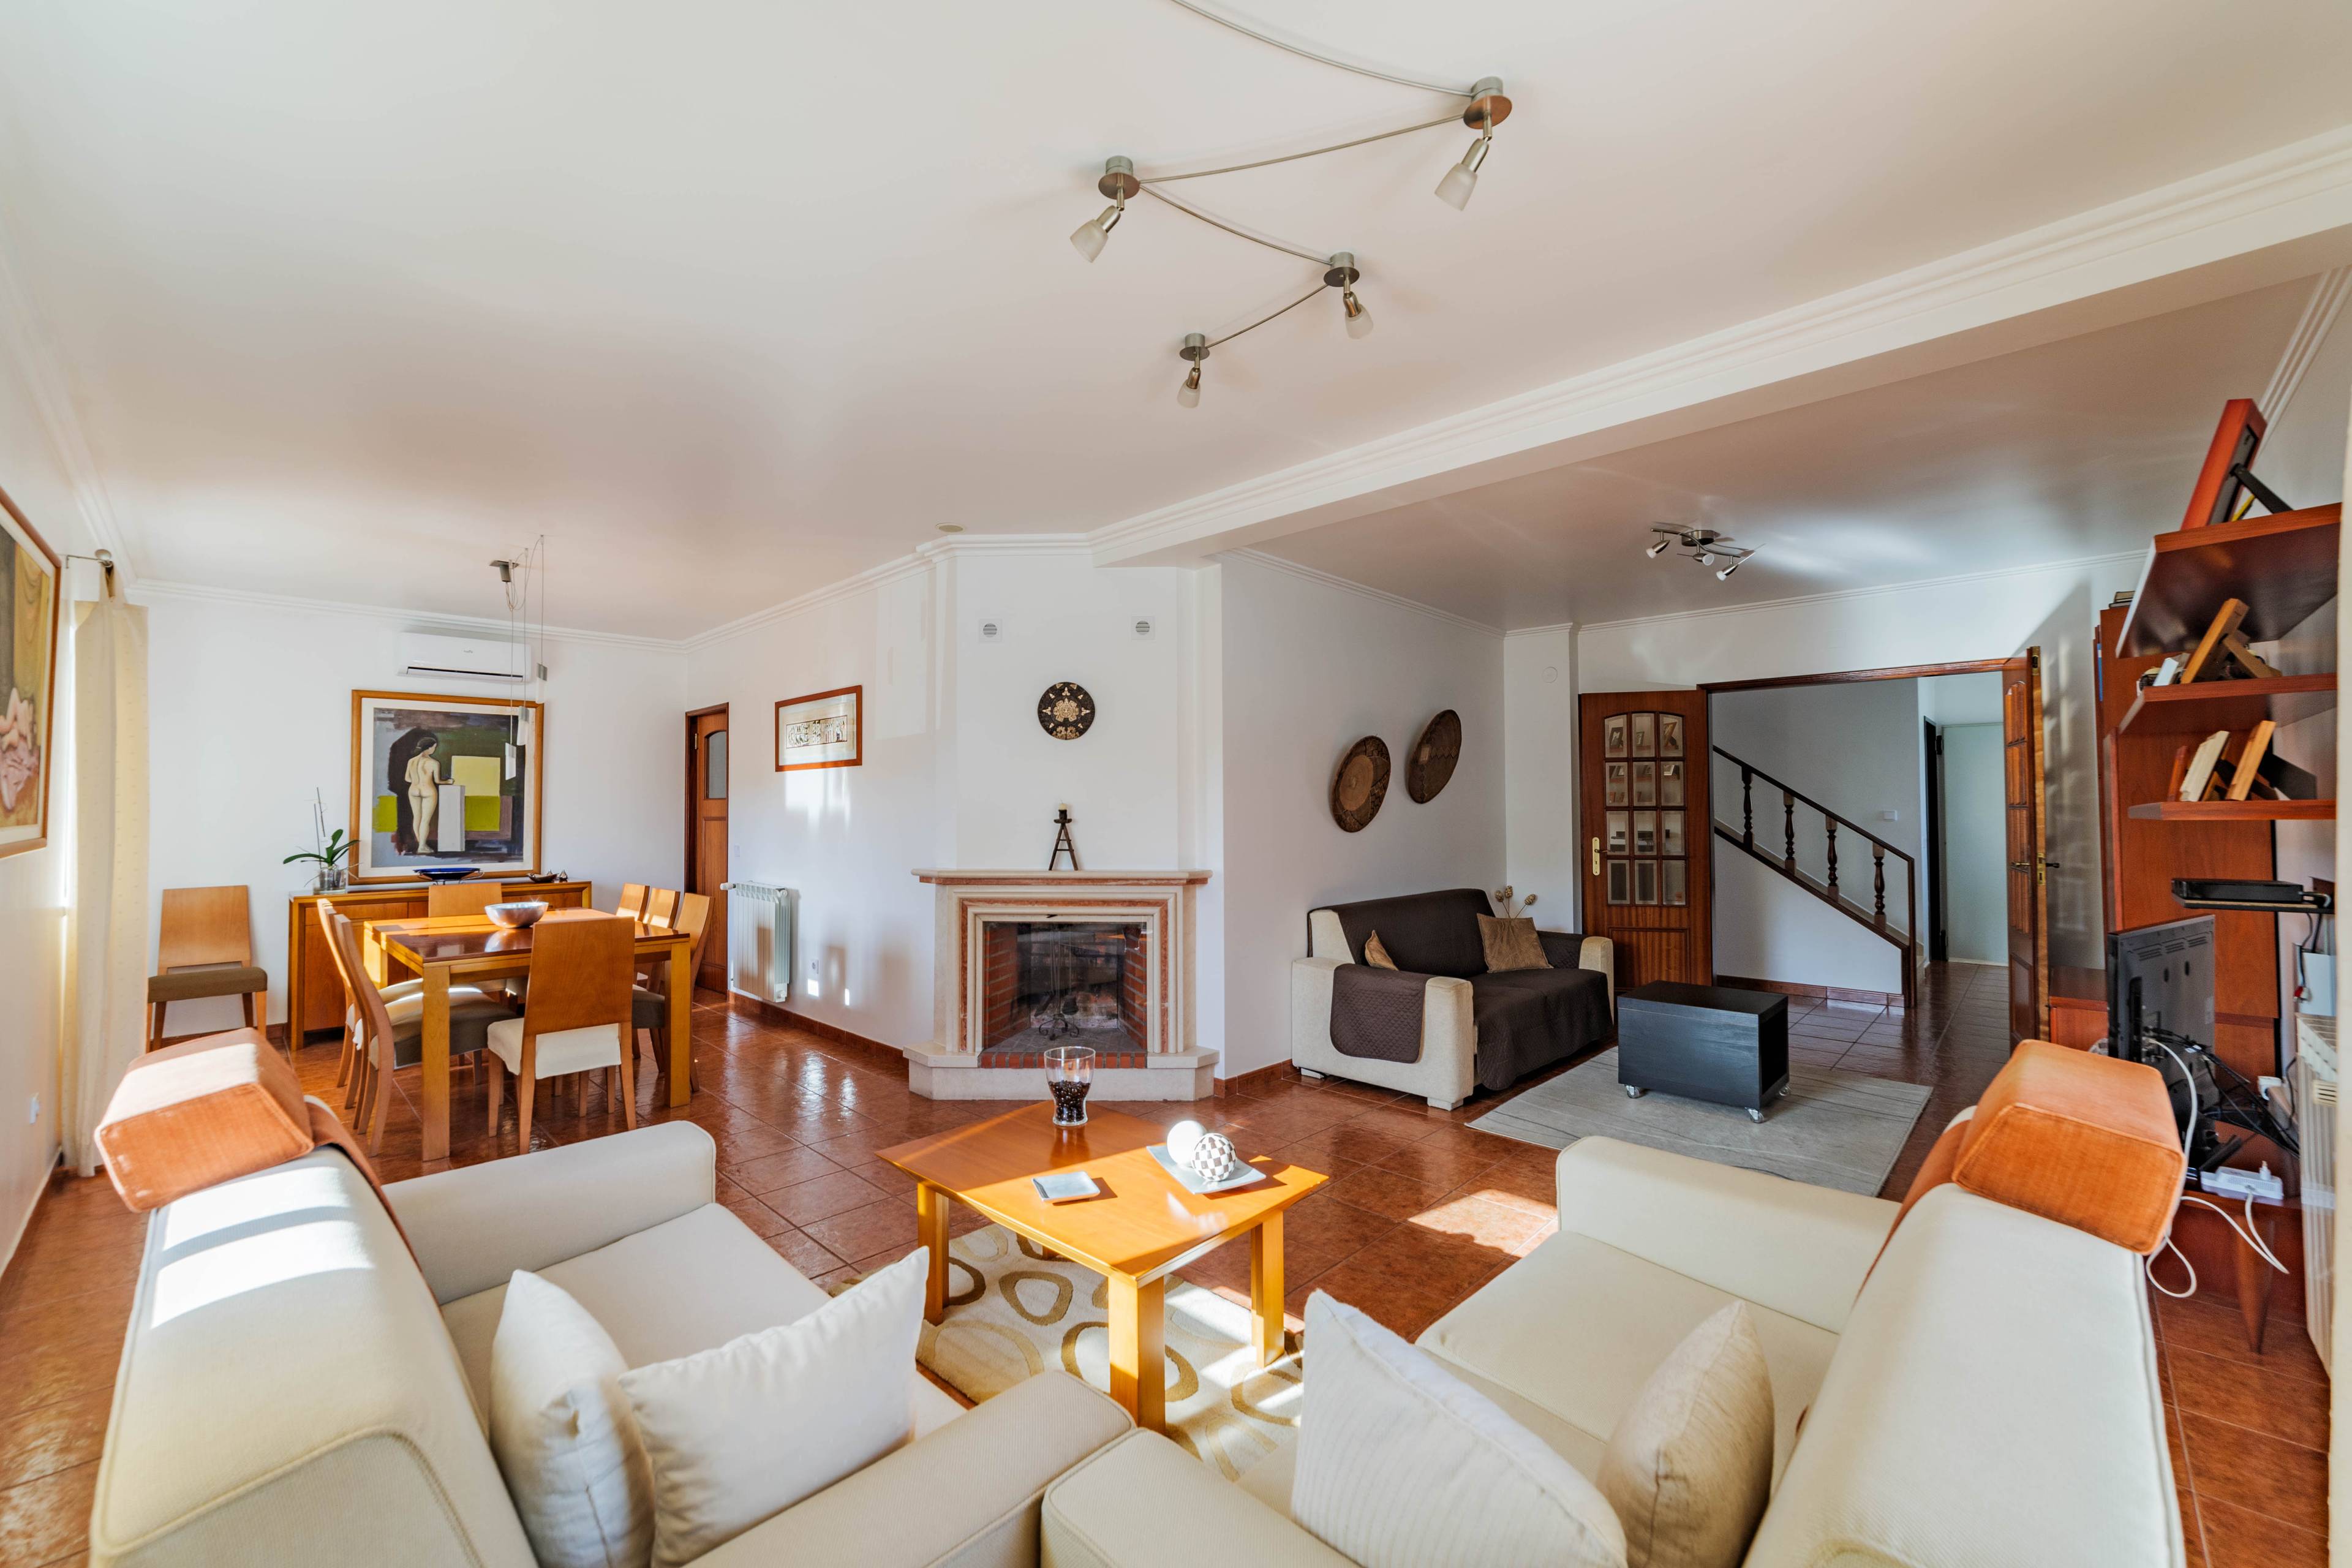 4BR Portuguese style spacious House with privacy, views and great location | Charneca de Caparica | Lisbon South Coast